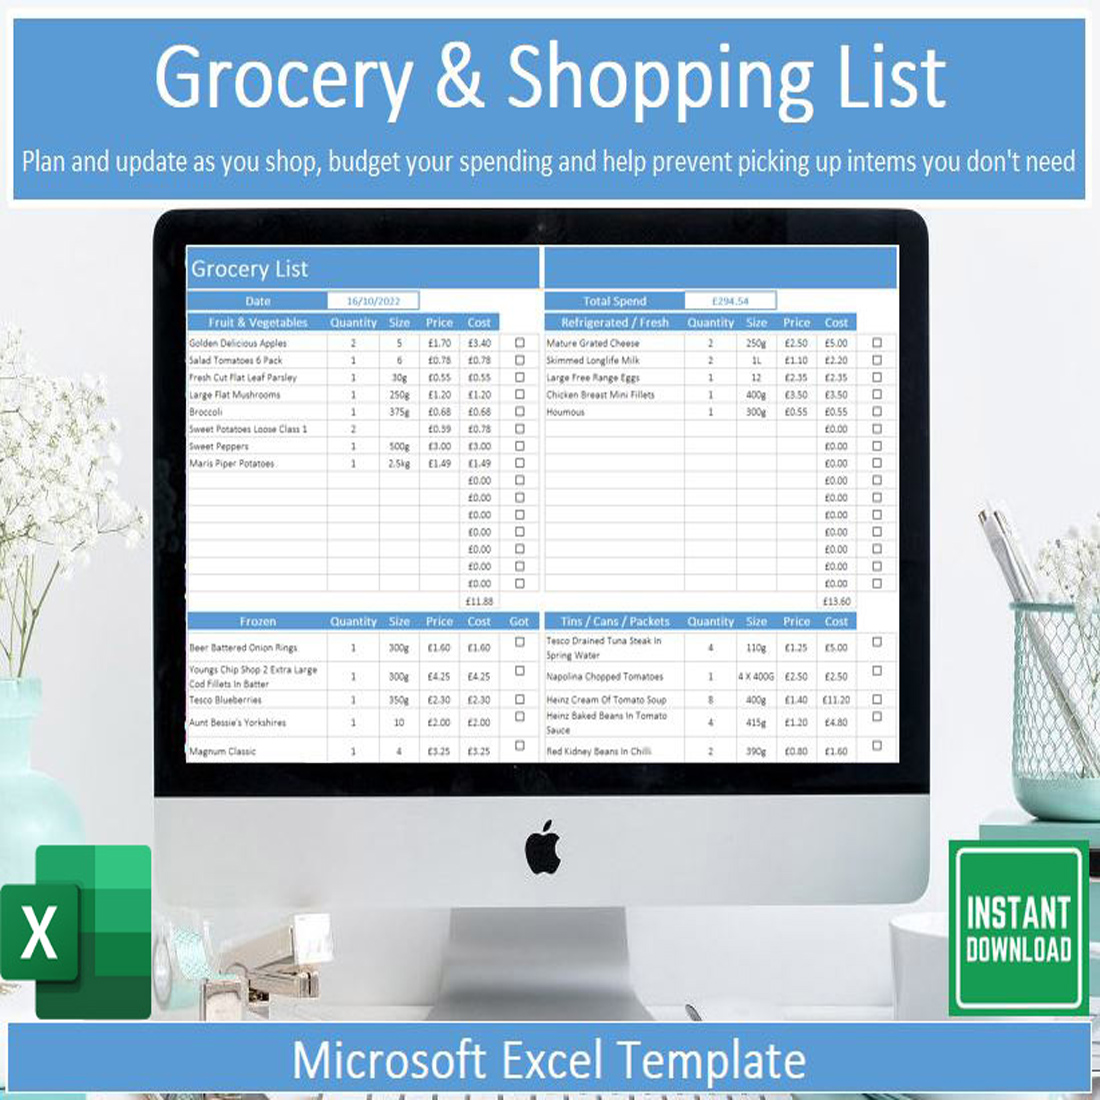 Editable Shopping List Template cover image.